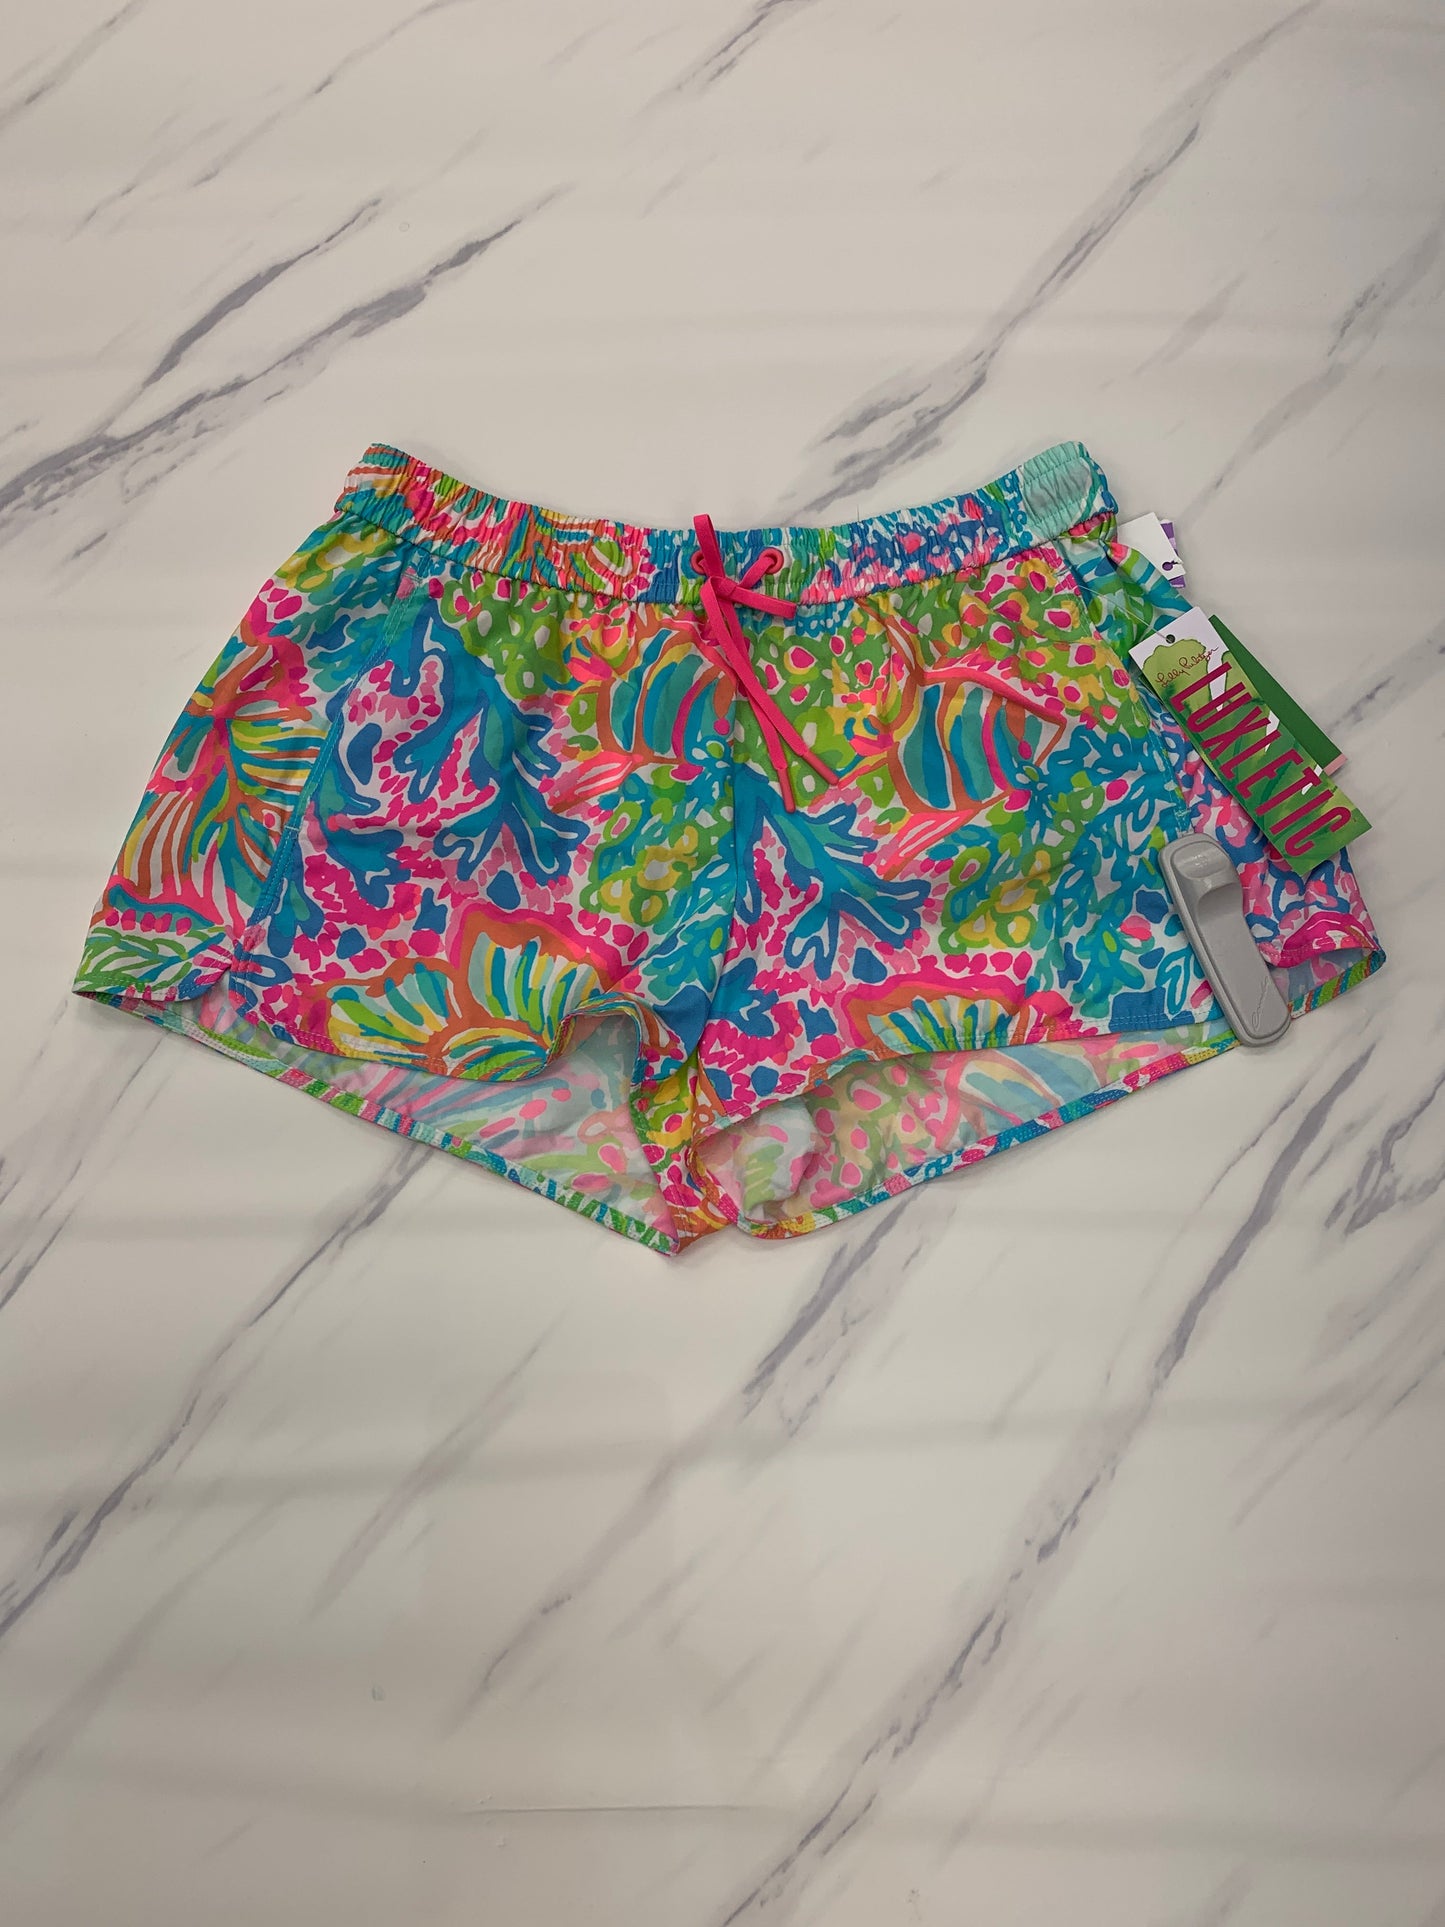 Athletic Shorts Lilly Pulitzer, Size M